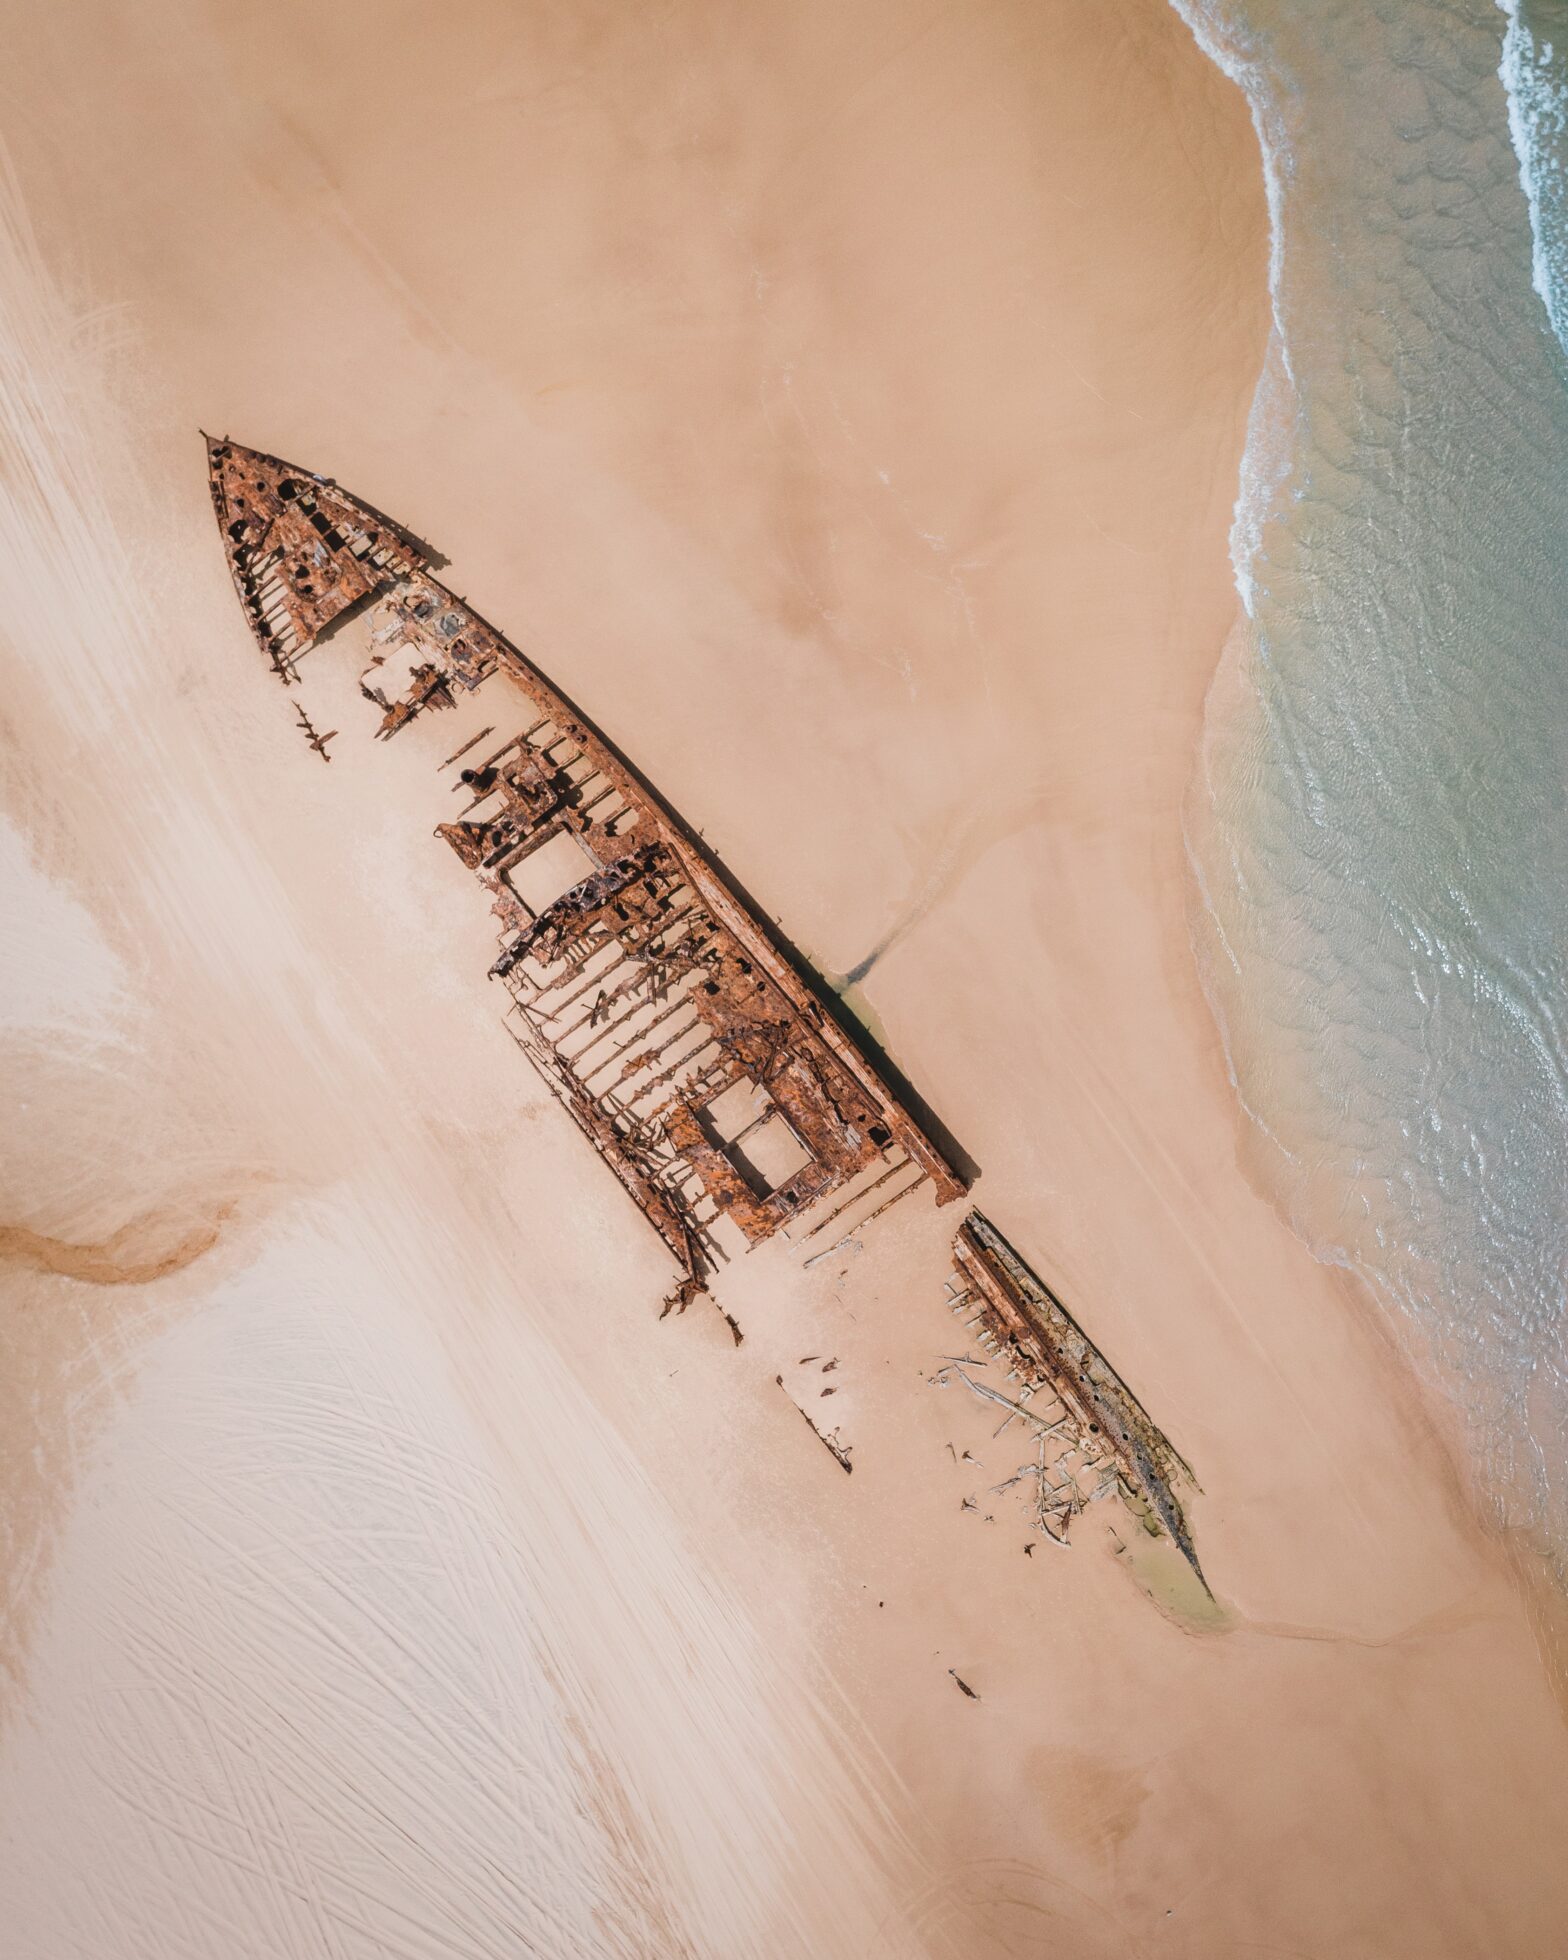 Shipwrecked boat hidden by sand